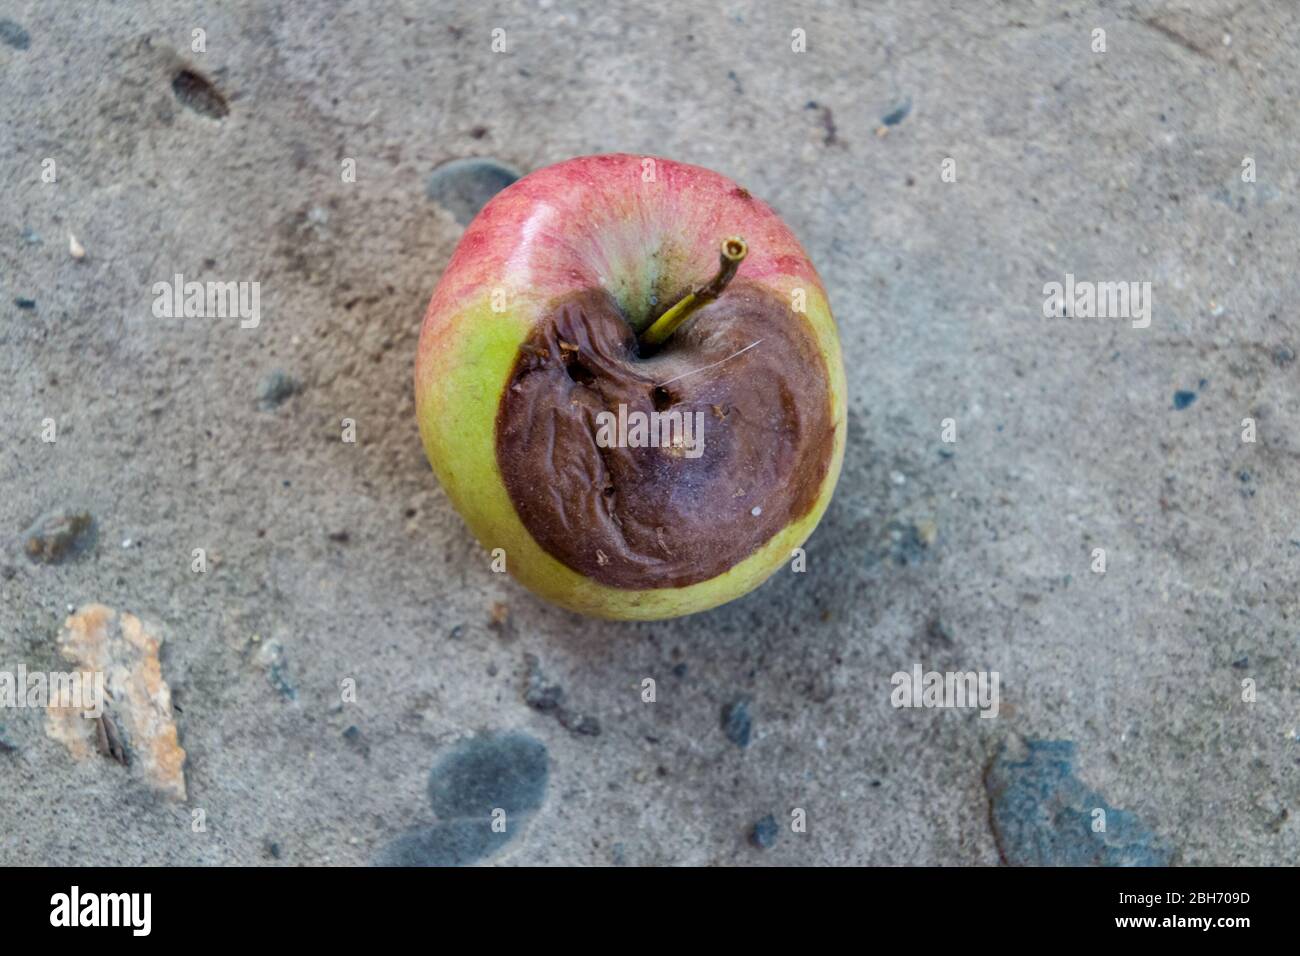 Rotten apple. a Defeat apples Spoiled crop Stock Photo